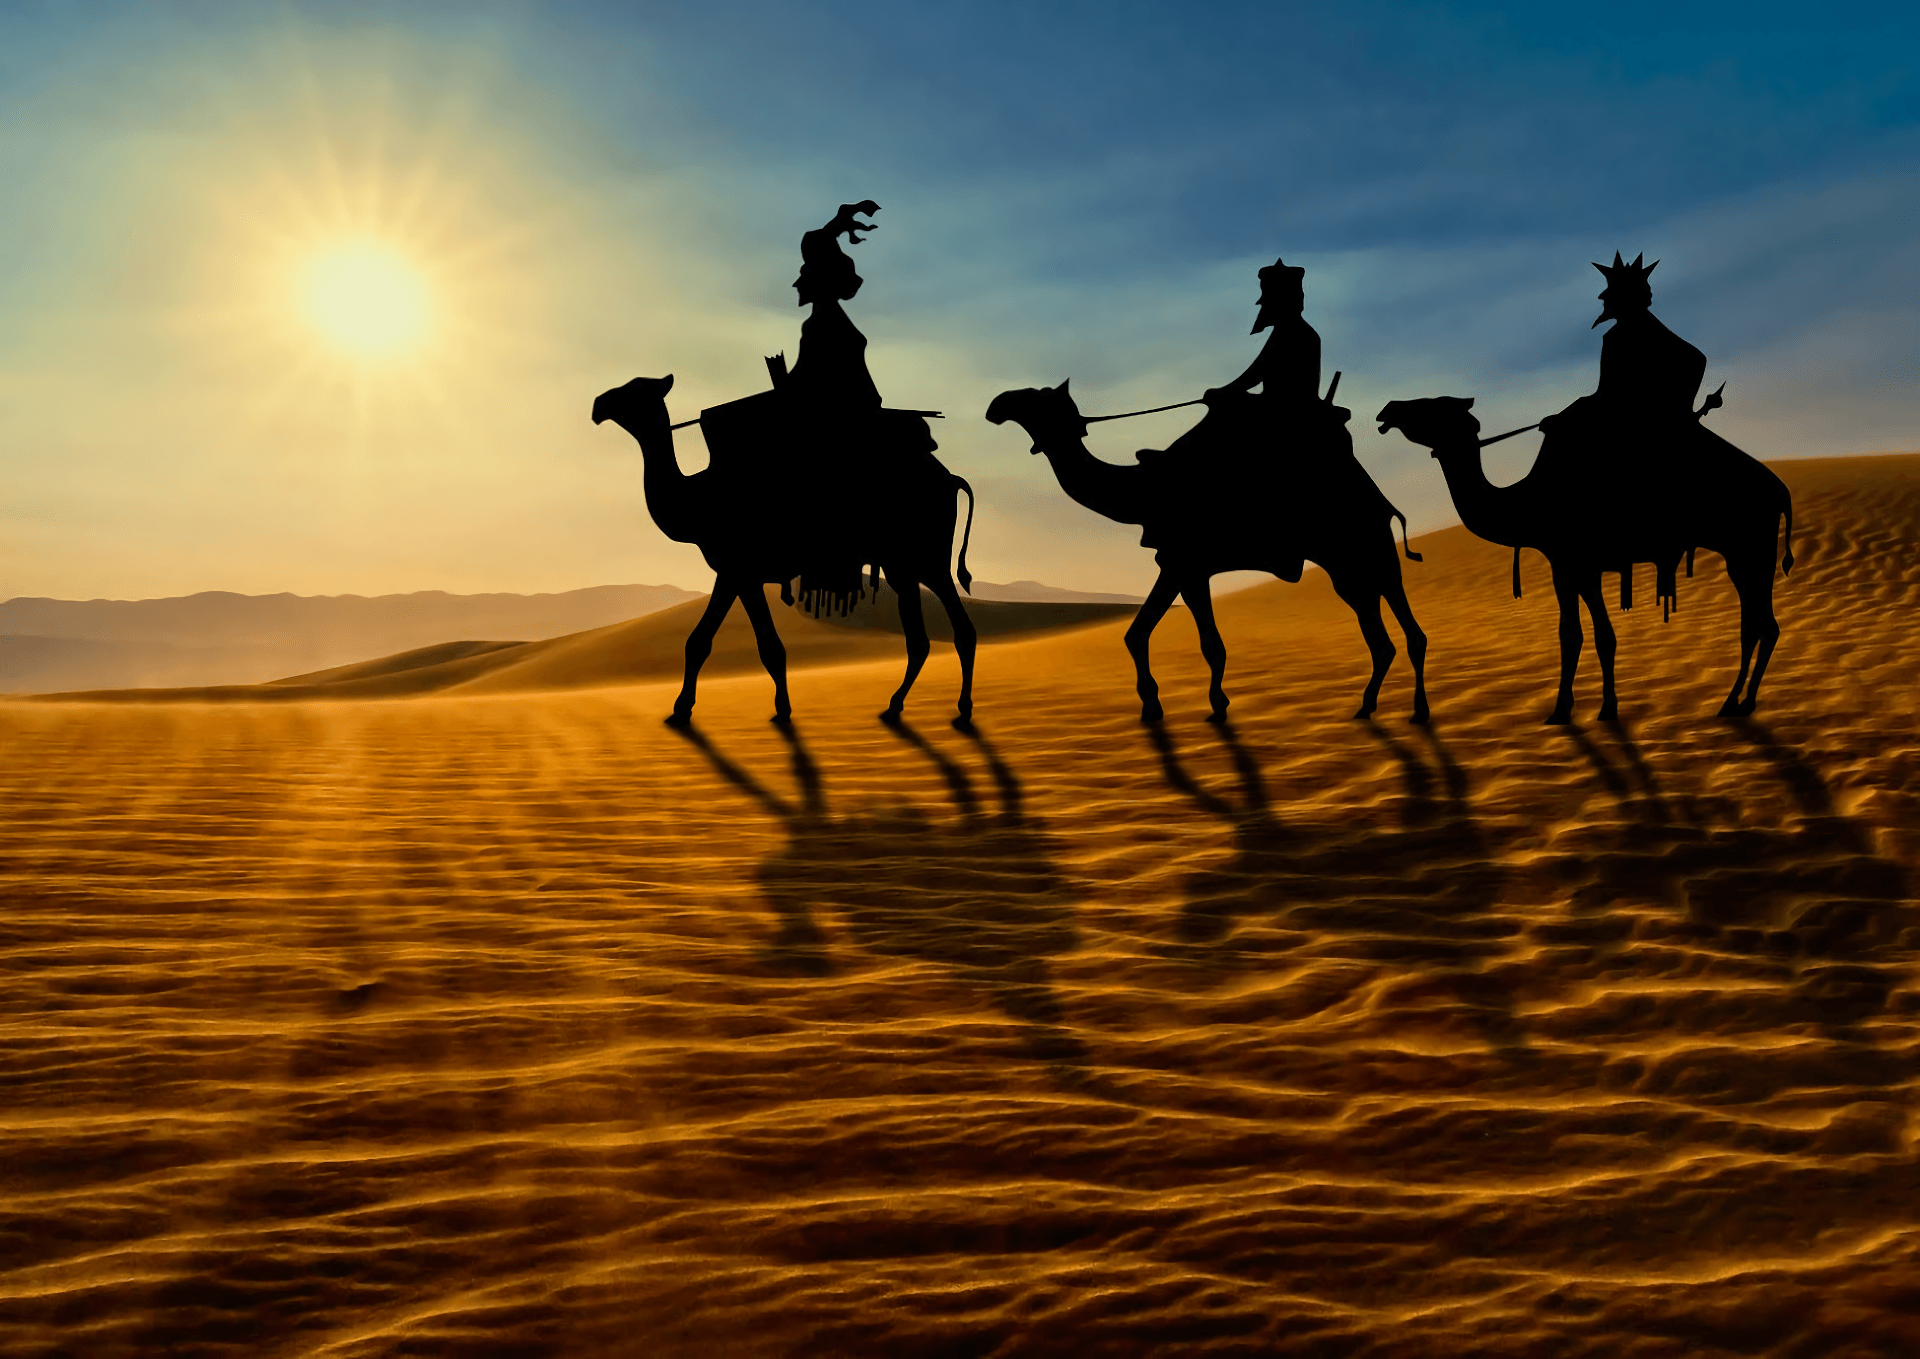 The three wise men HD Wallpaper. Background Image